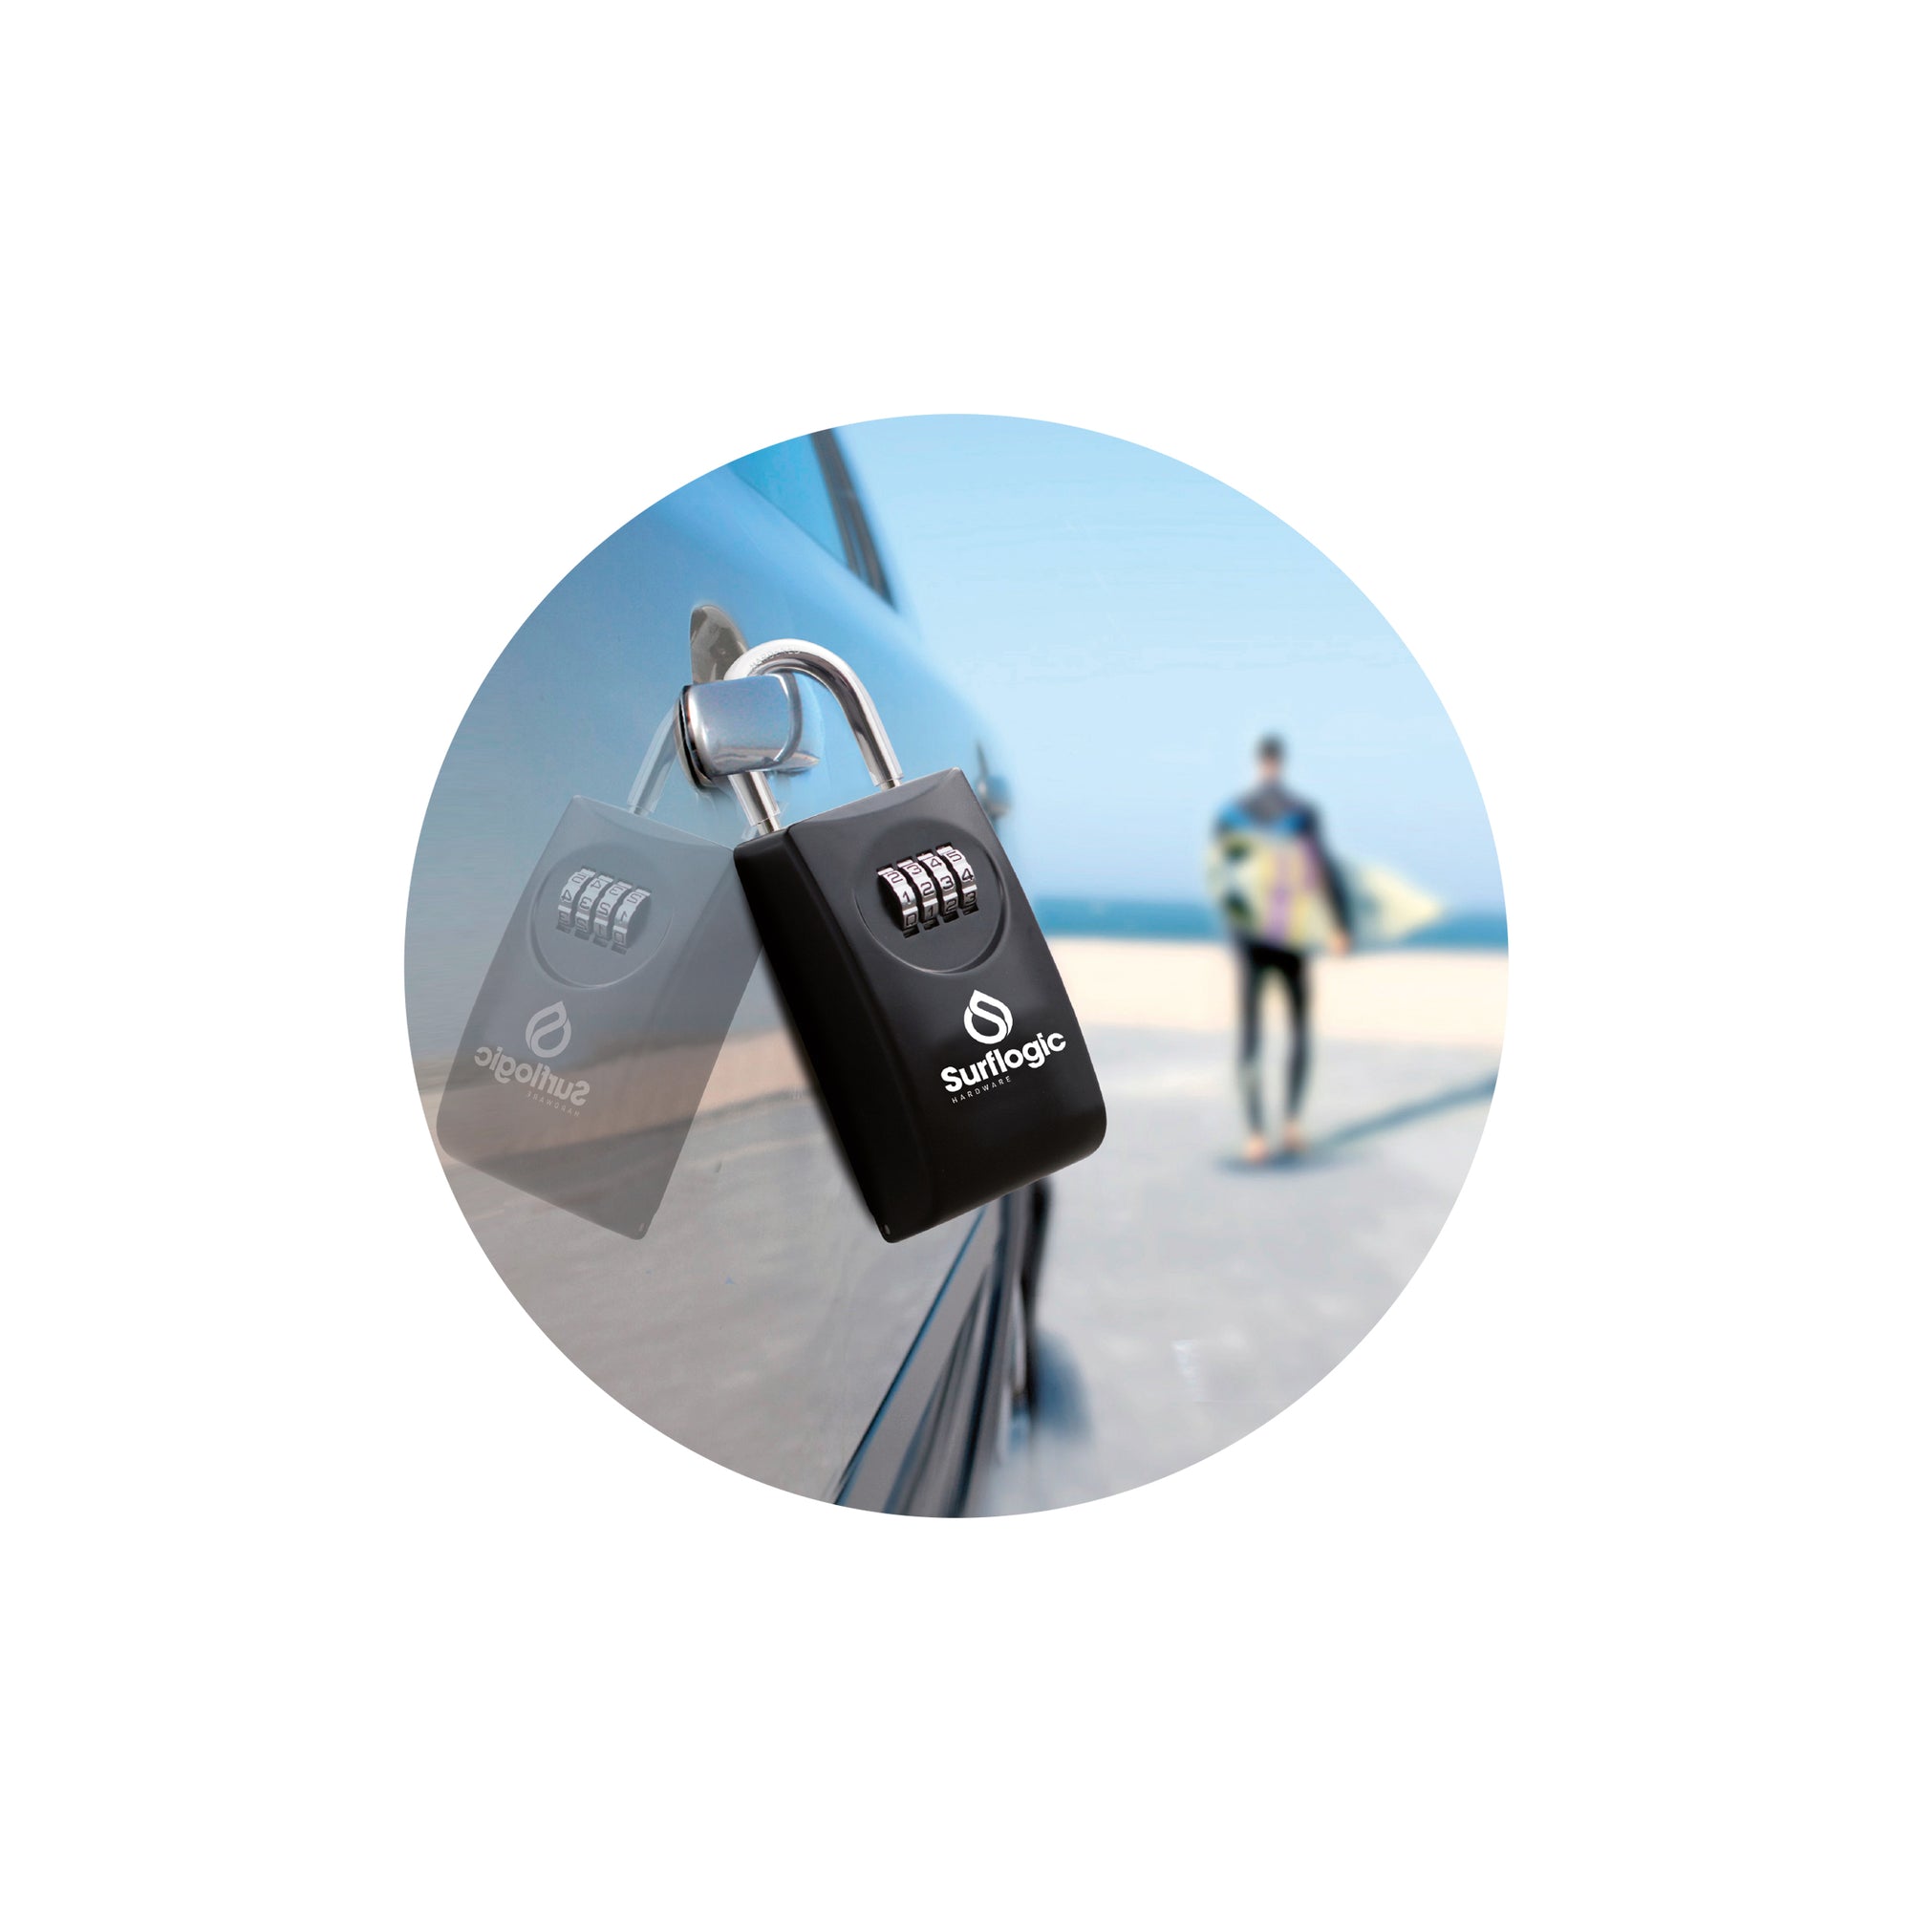 Surflogic Security Lock Double System